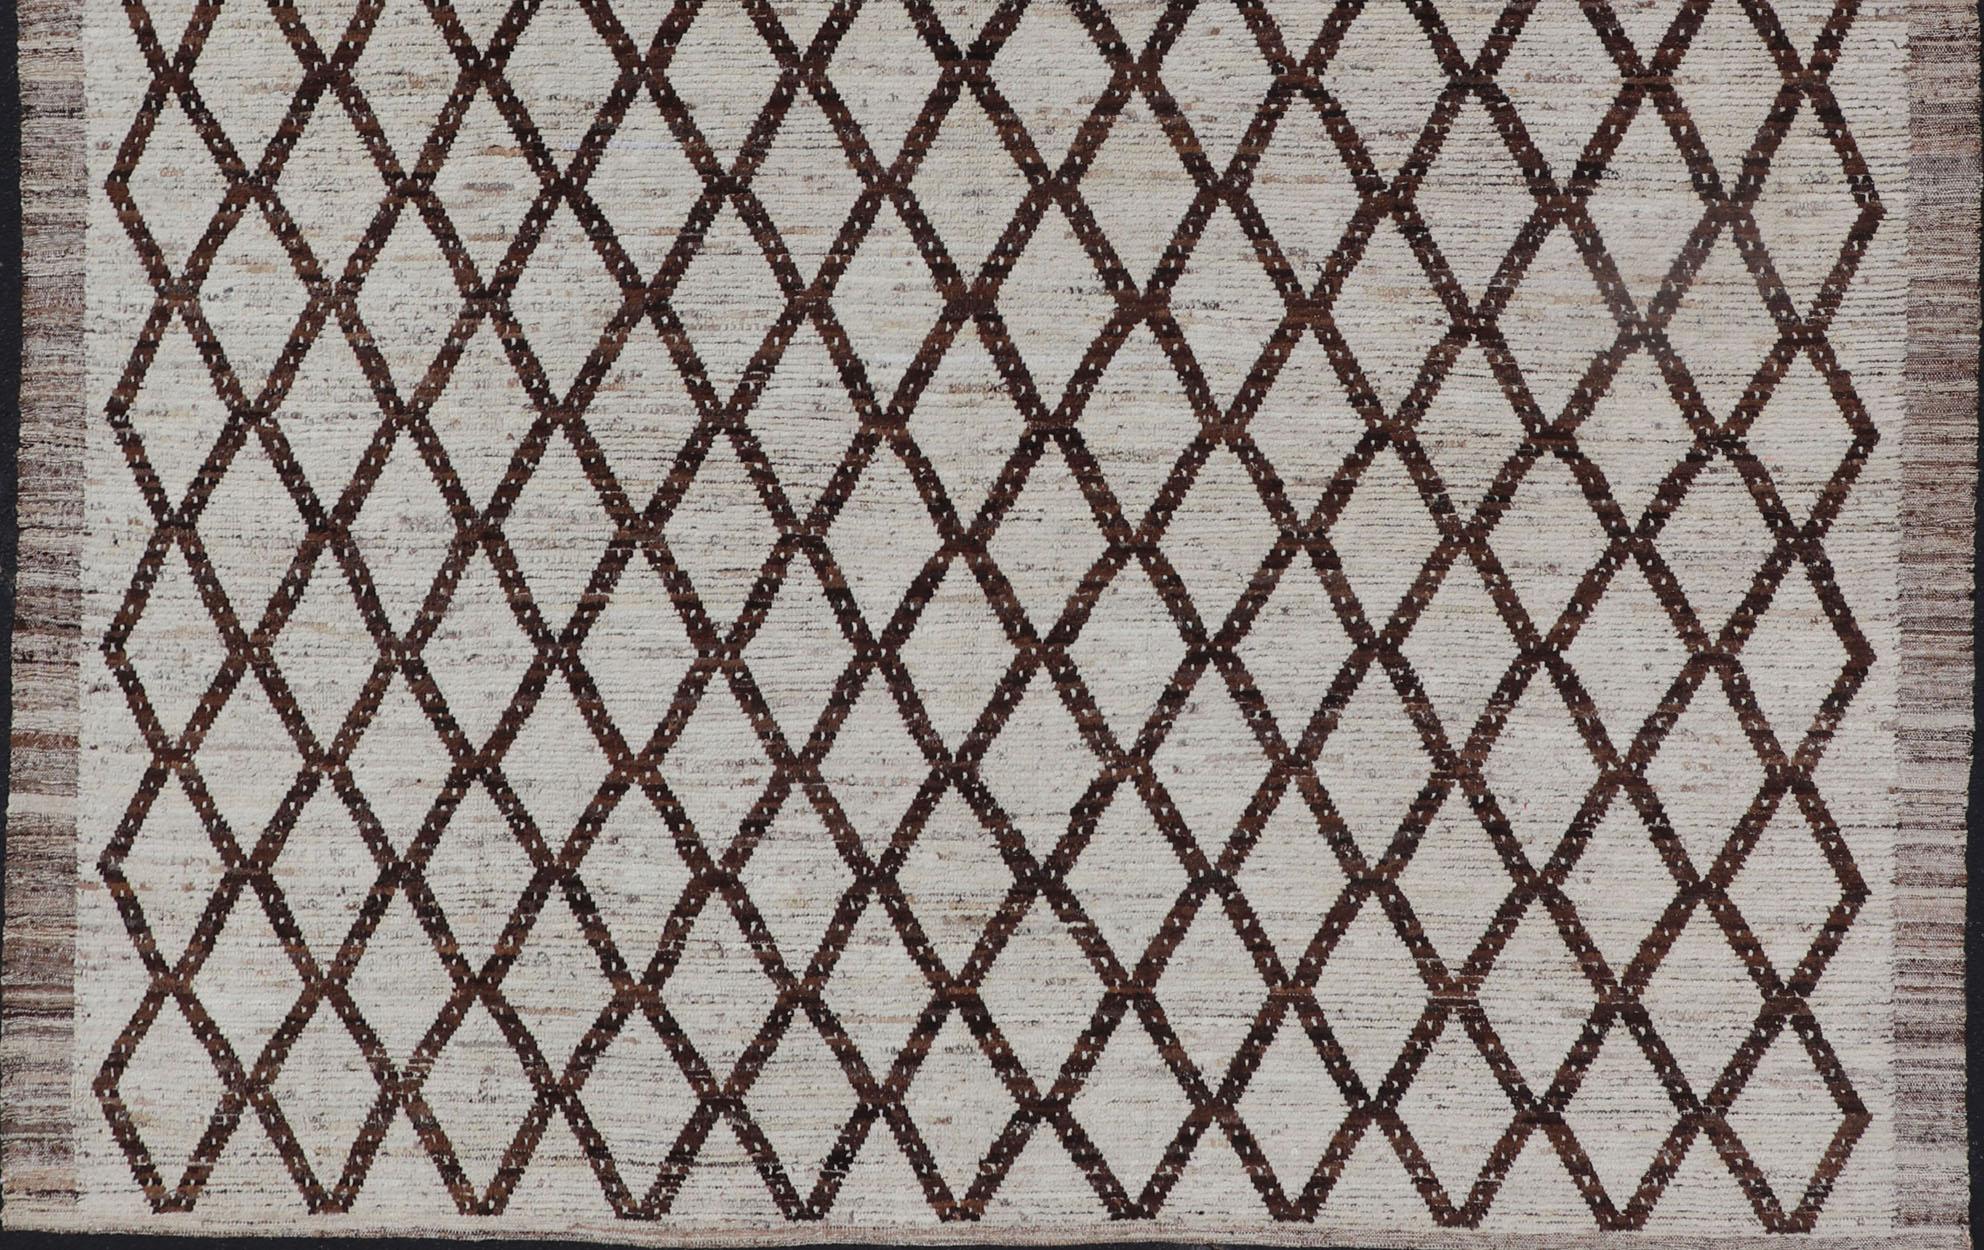 Afghan Tribal Moroccan with Intricate Diamond Pattern in White and Earth Tones For Sale